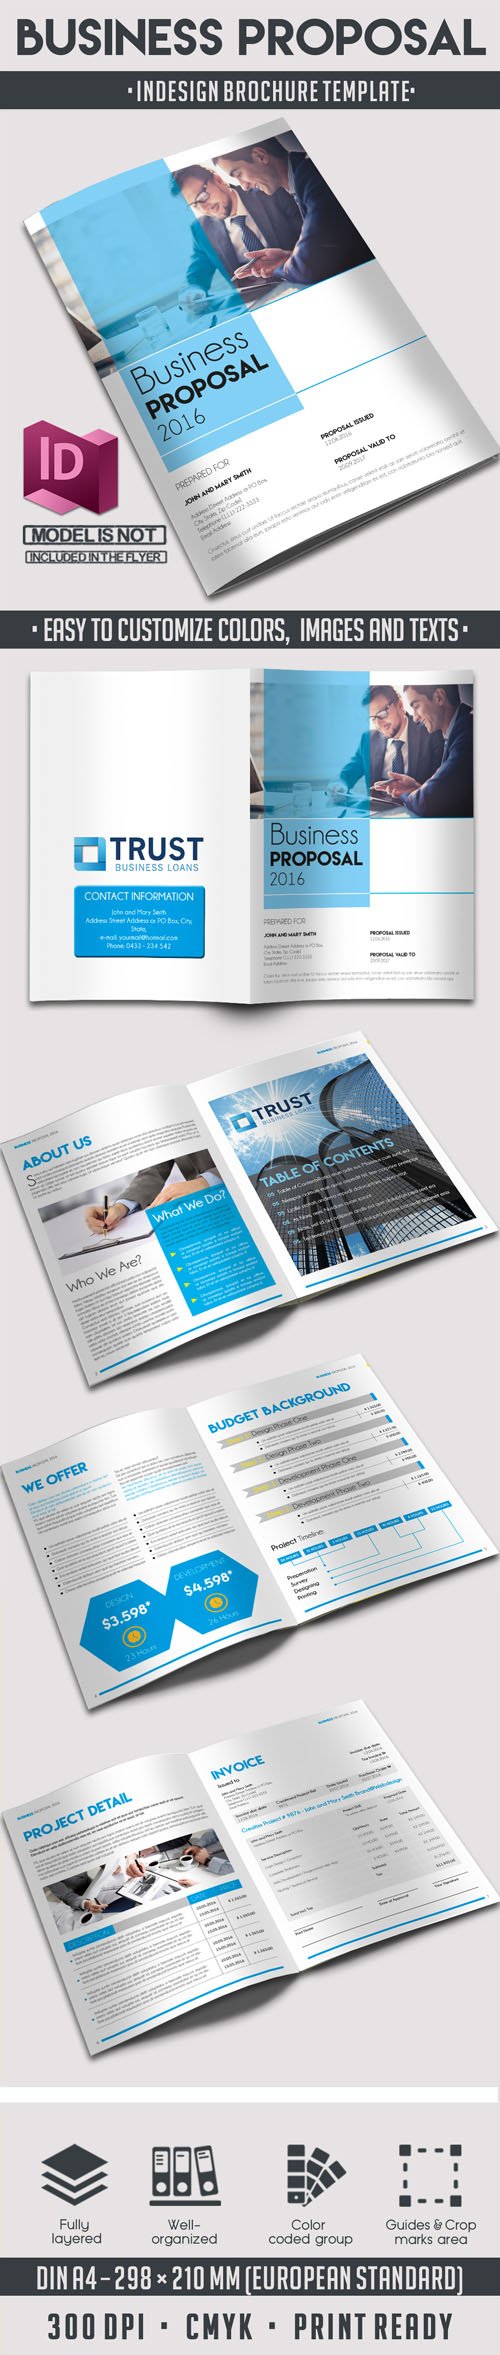 8 Pages Business Proposal Indesign A4 Brochure